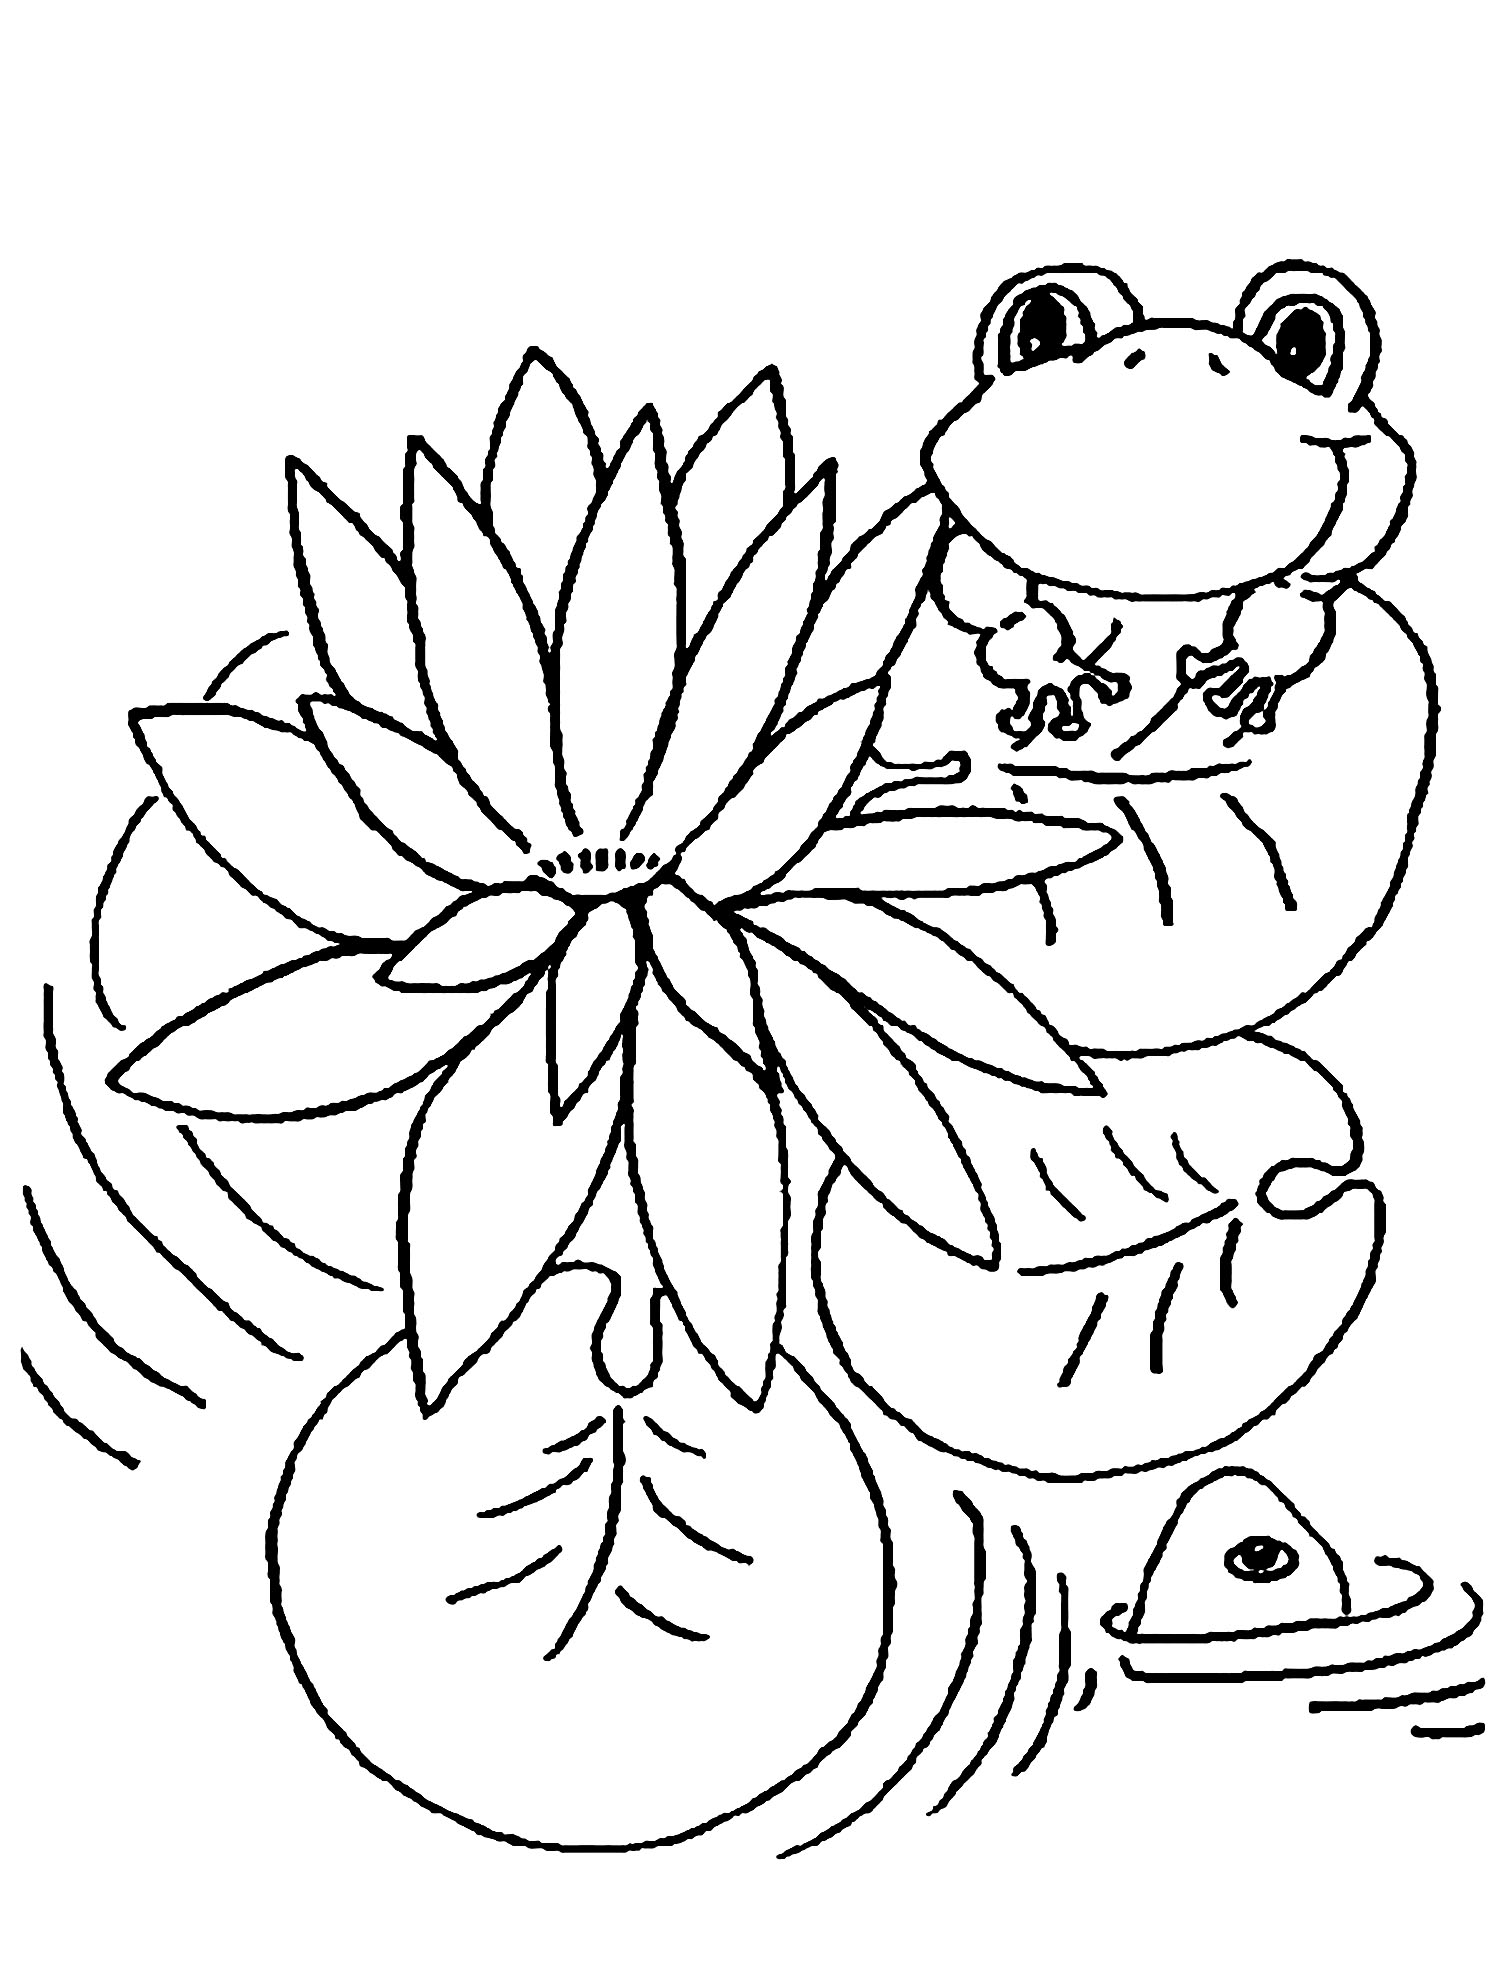 Frog on lily pad coloring page Lovely Lily Pad Coloring Page New  Conventional Lily Pad Coloring Page - Frogs Kids Coloring Pages